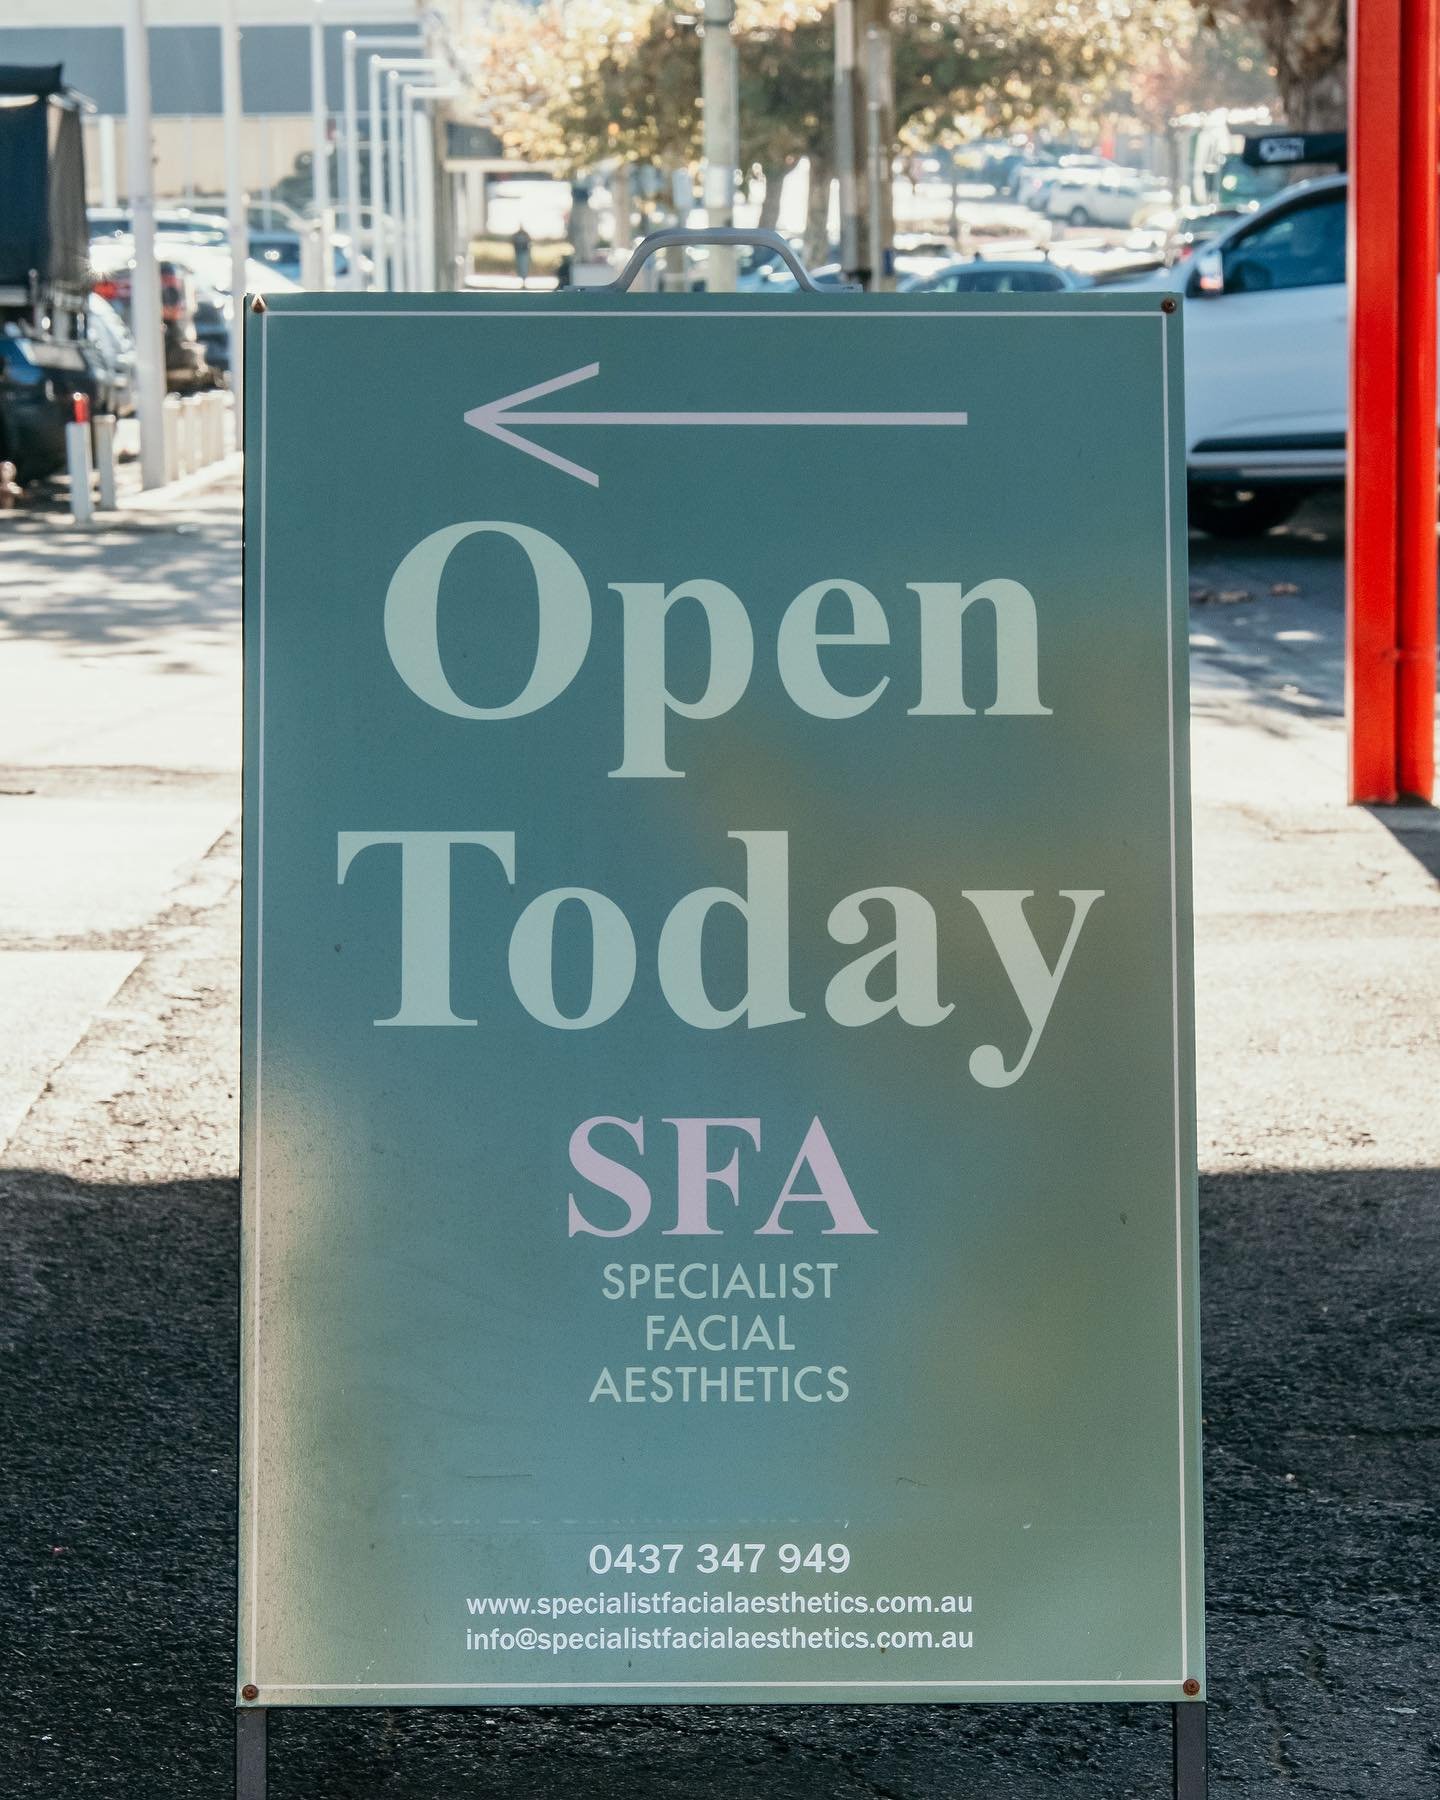 Open every Monday, Wednesday and Thursday at 119 Fairy street. If you are in need of a last minute/same day appointment I am occasionally able to accommodate and extend my regular hours, please phone or email with your request.